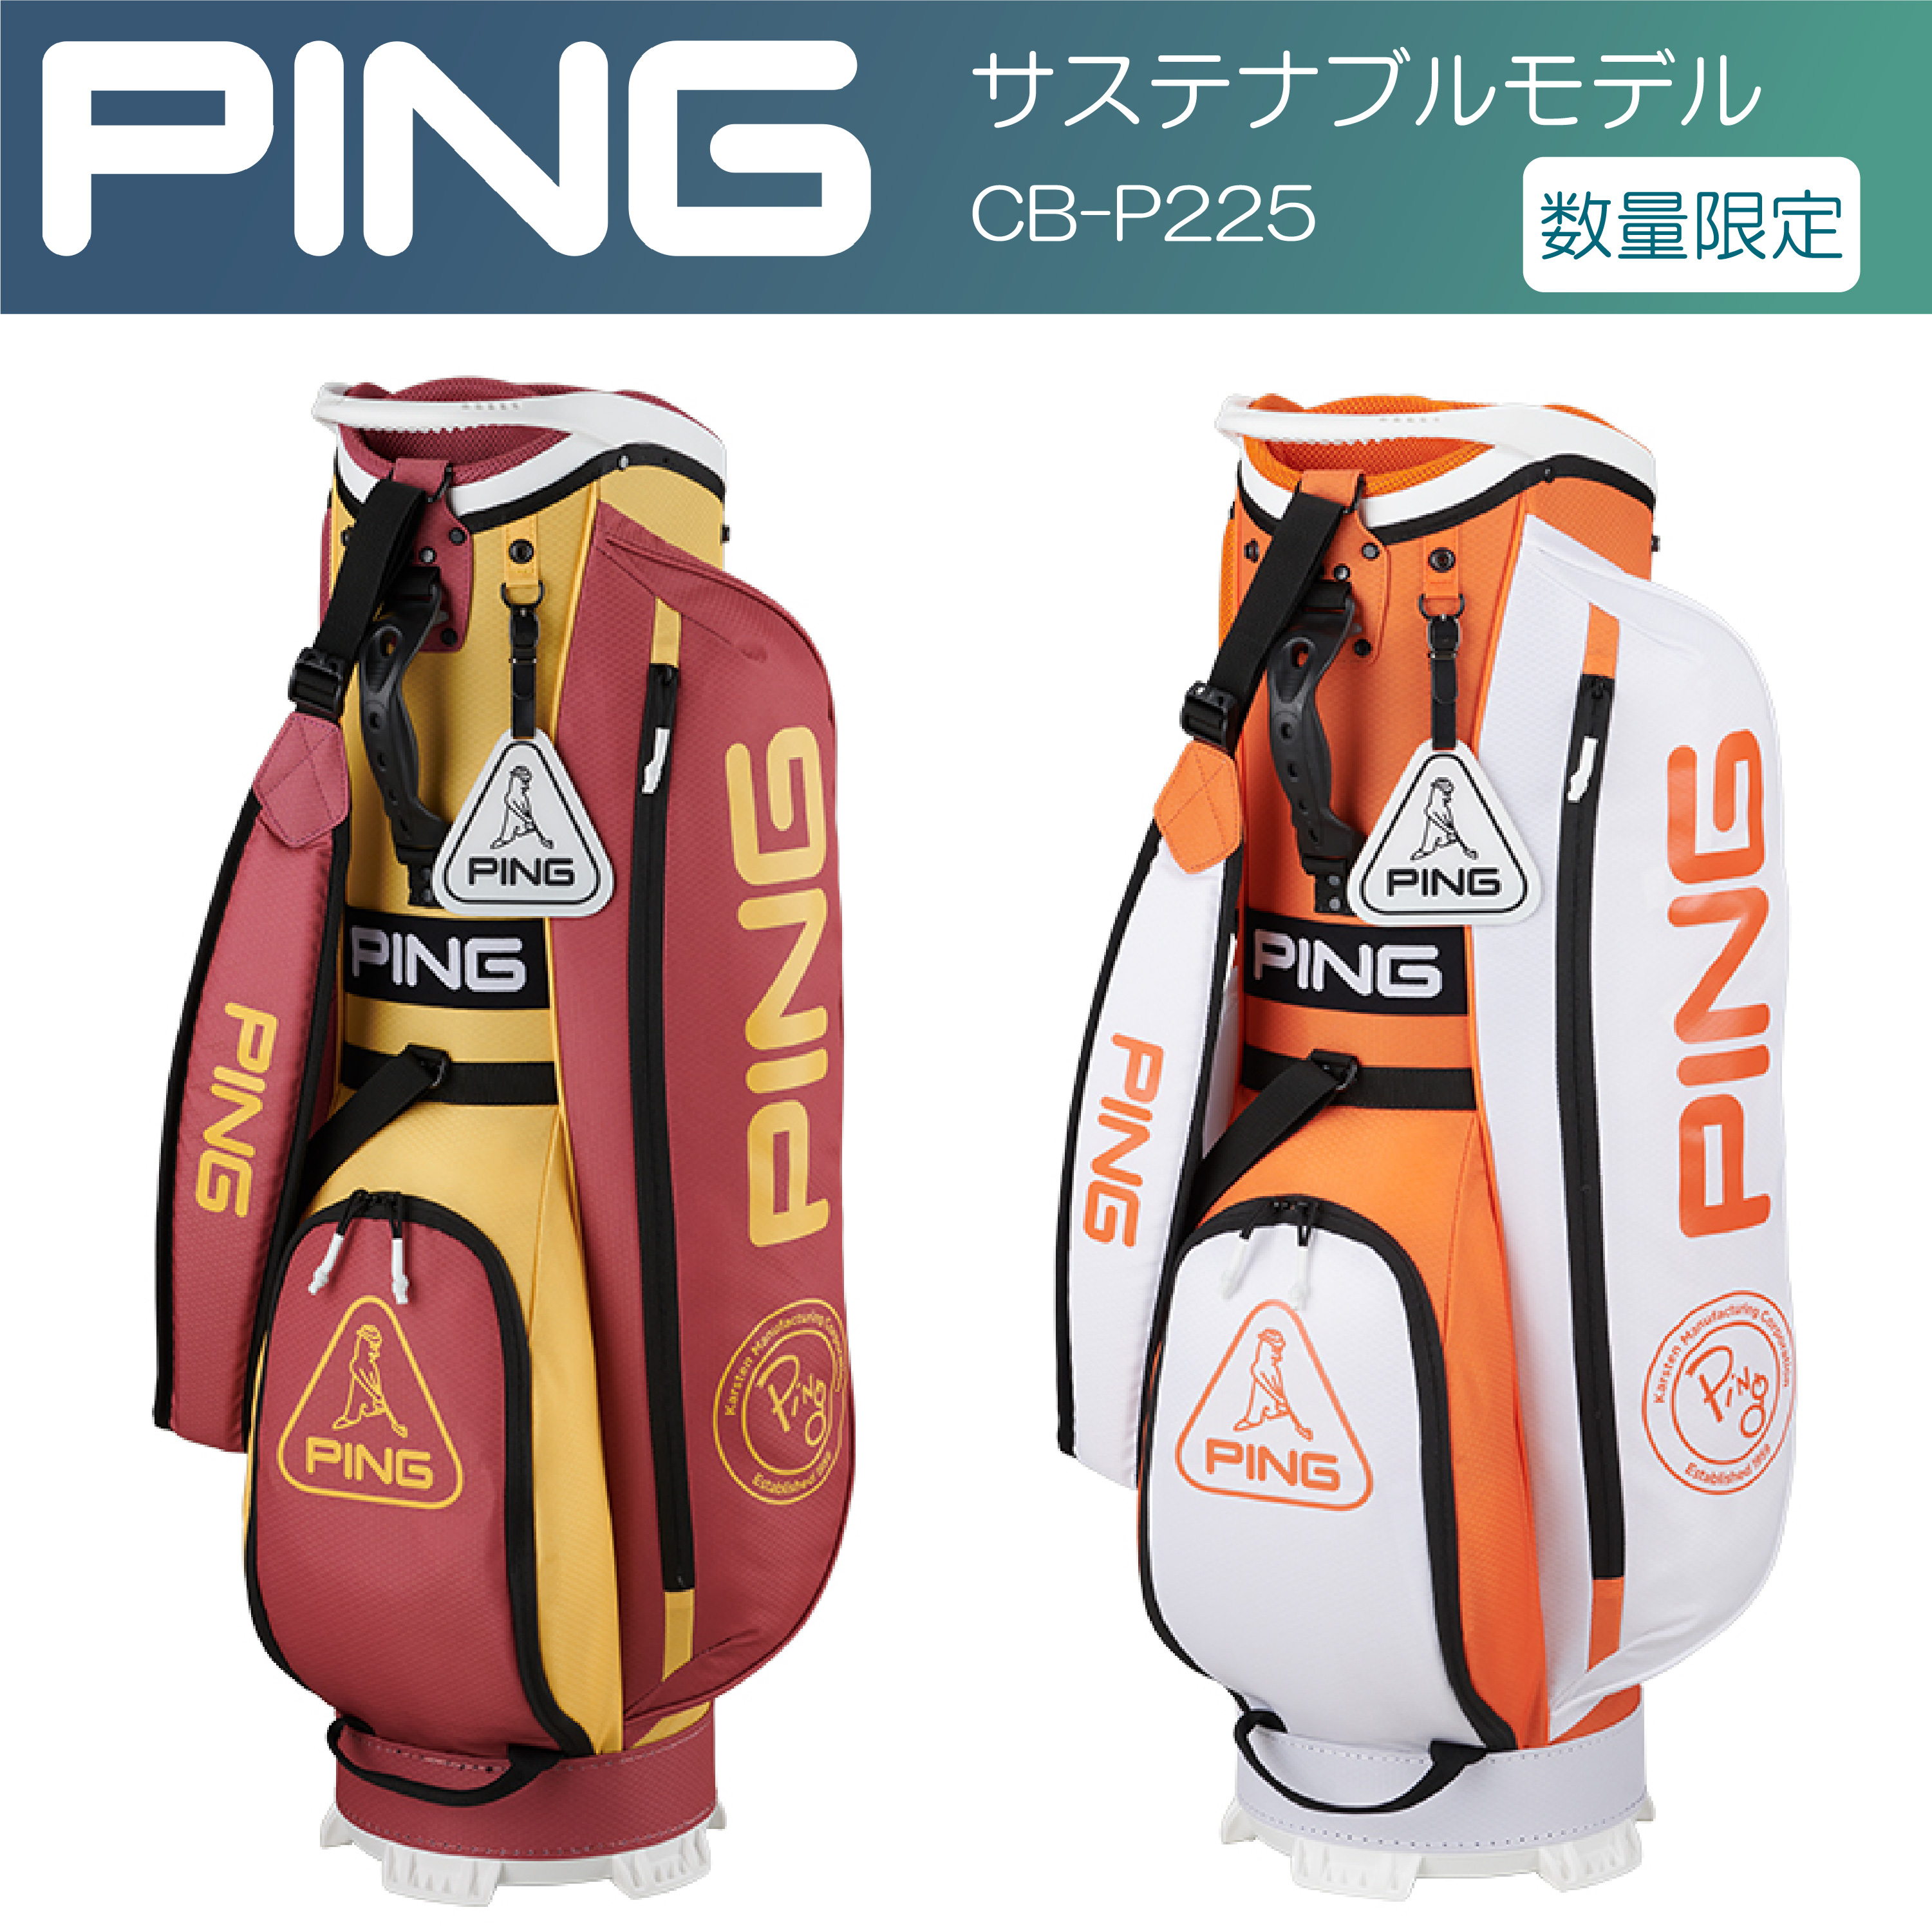 PING SUSTAINABLE CB-P225 数量限定